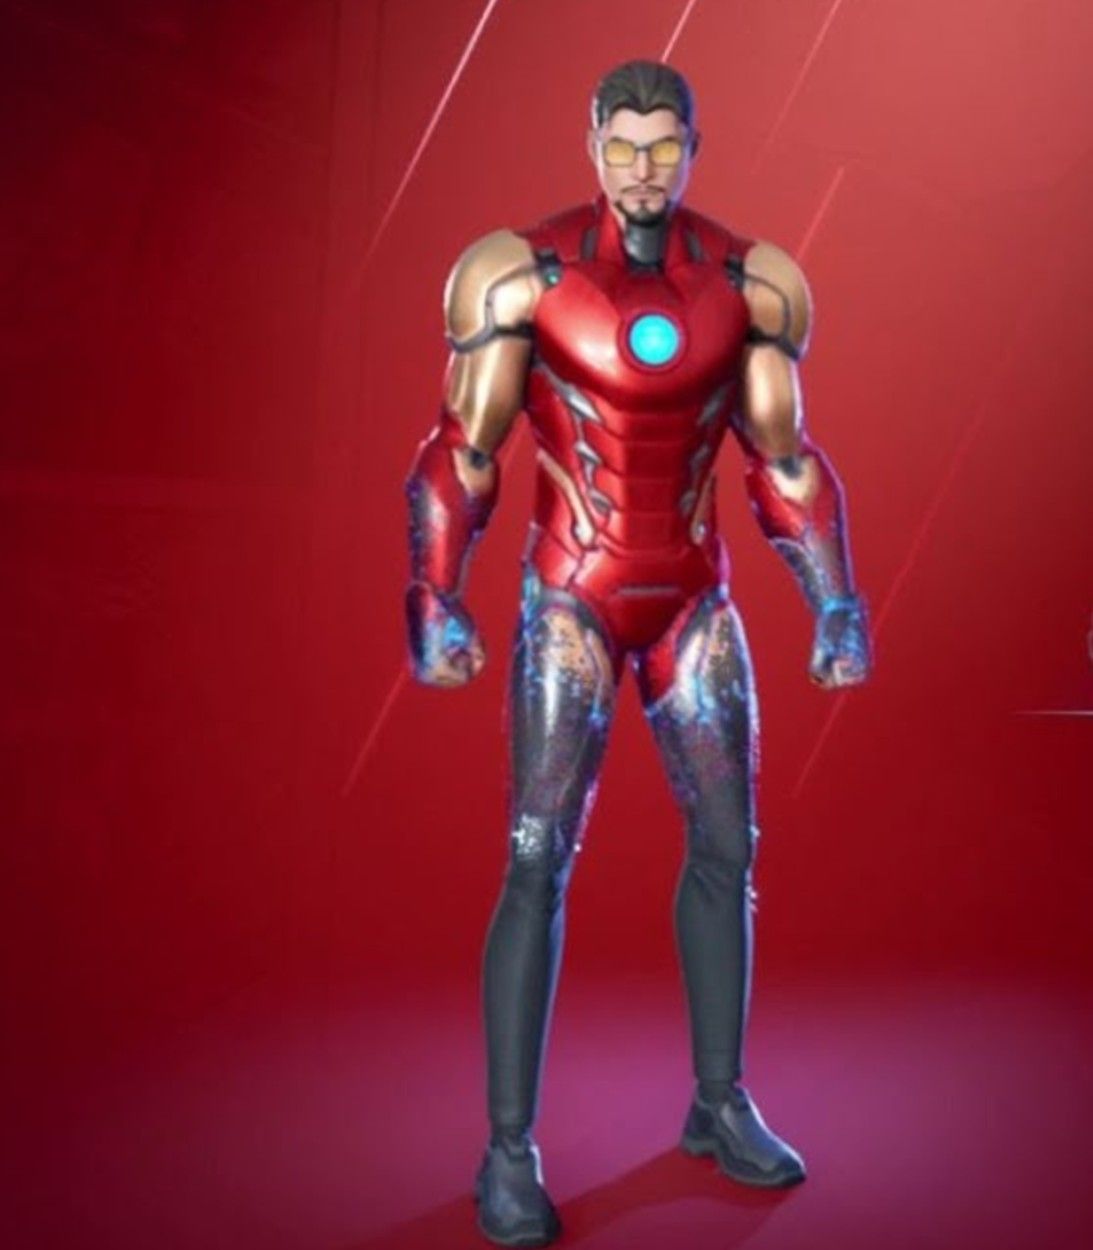 The Iron Man Suit-Up Built in Emote for the Tony Stark skin in Fortnite Season 4